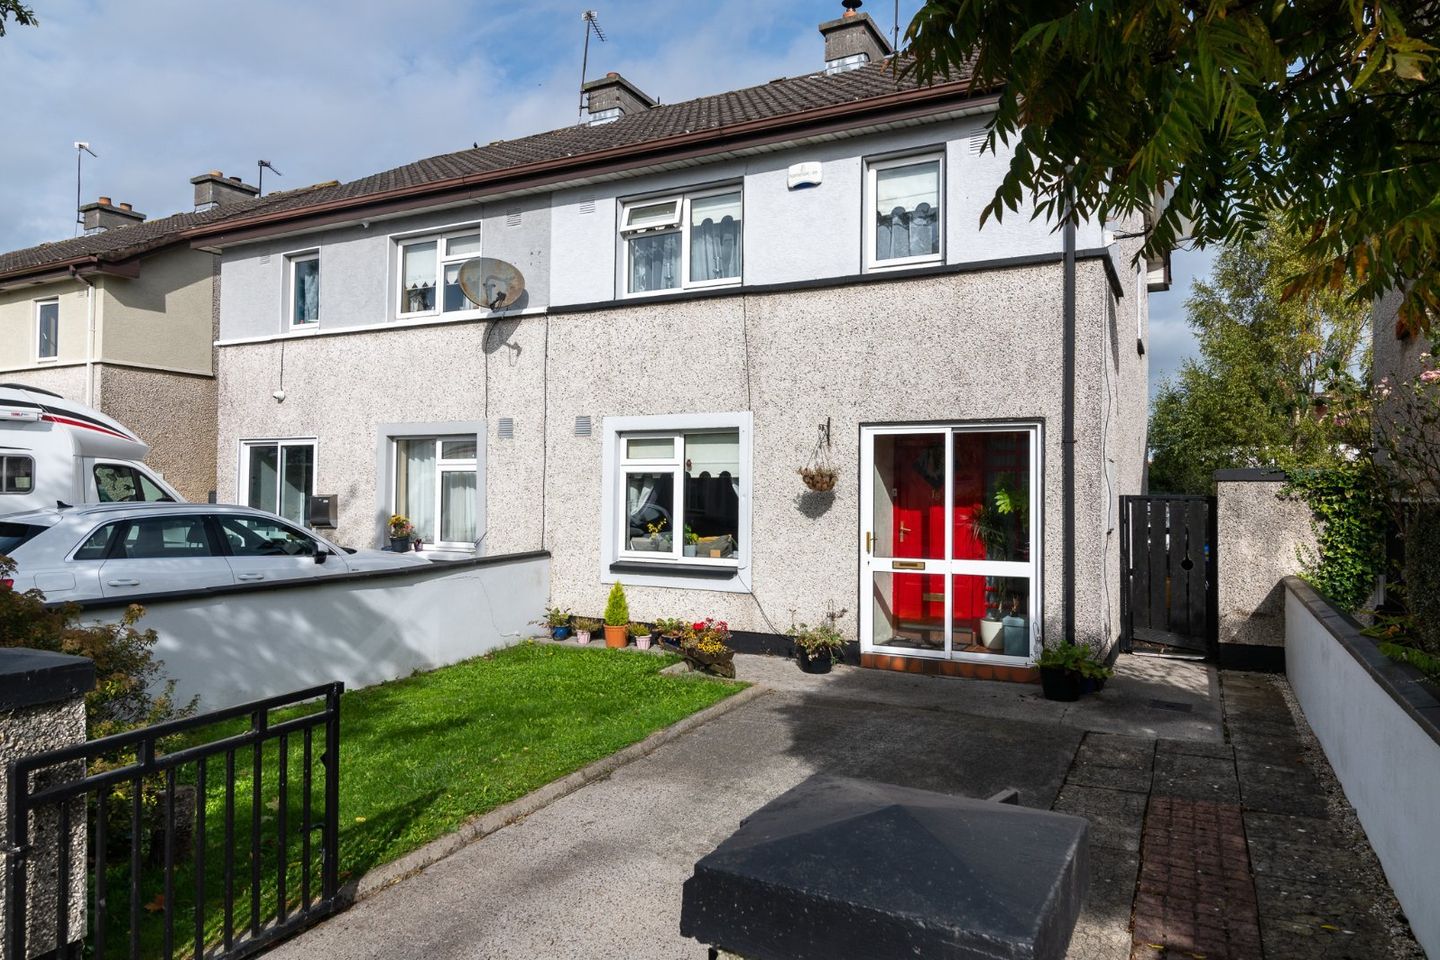 18 Cloncollig Housing Estate, Tullamore, Co. Offaly